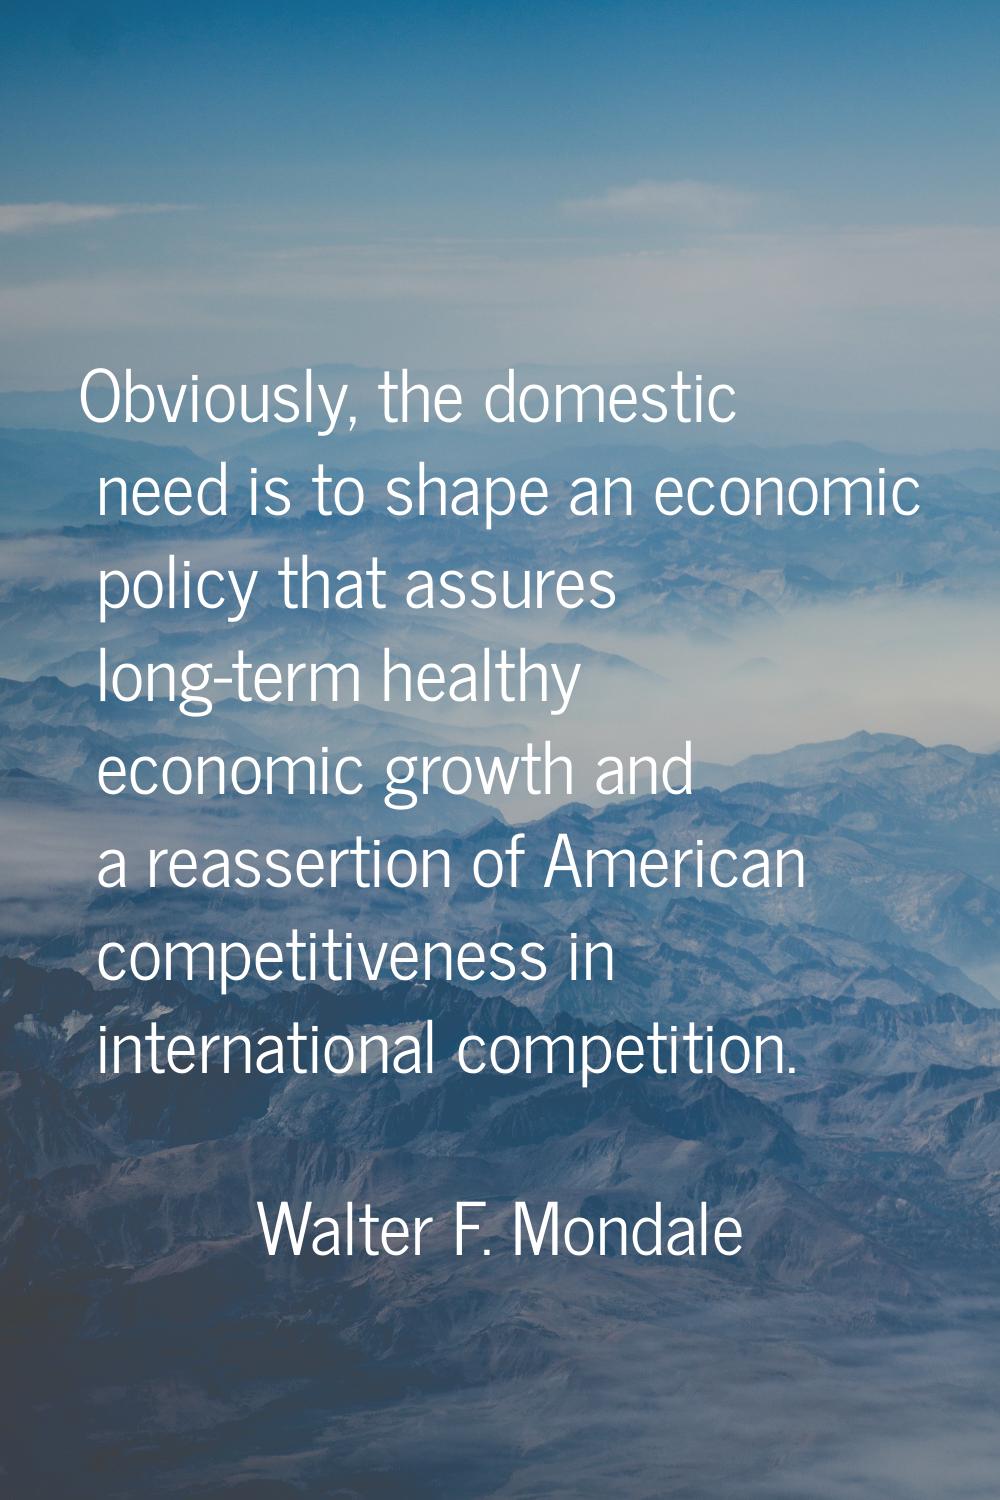 Obviously, the domestic need is to shape an economic policy that assures long-term healthy economic